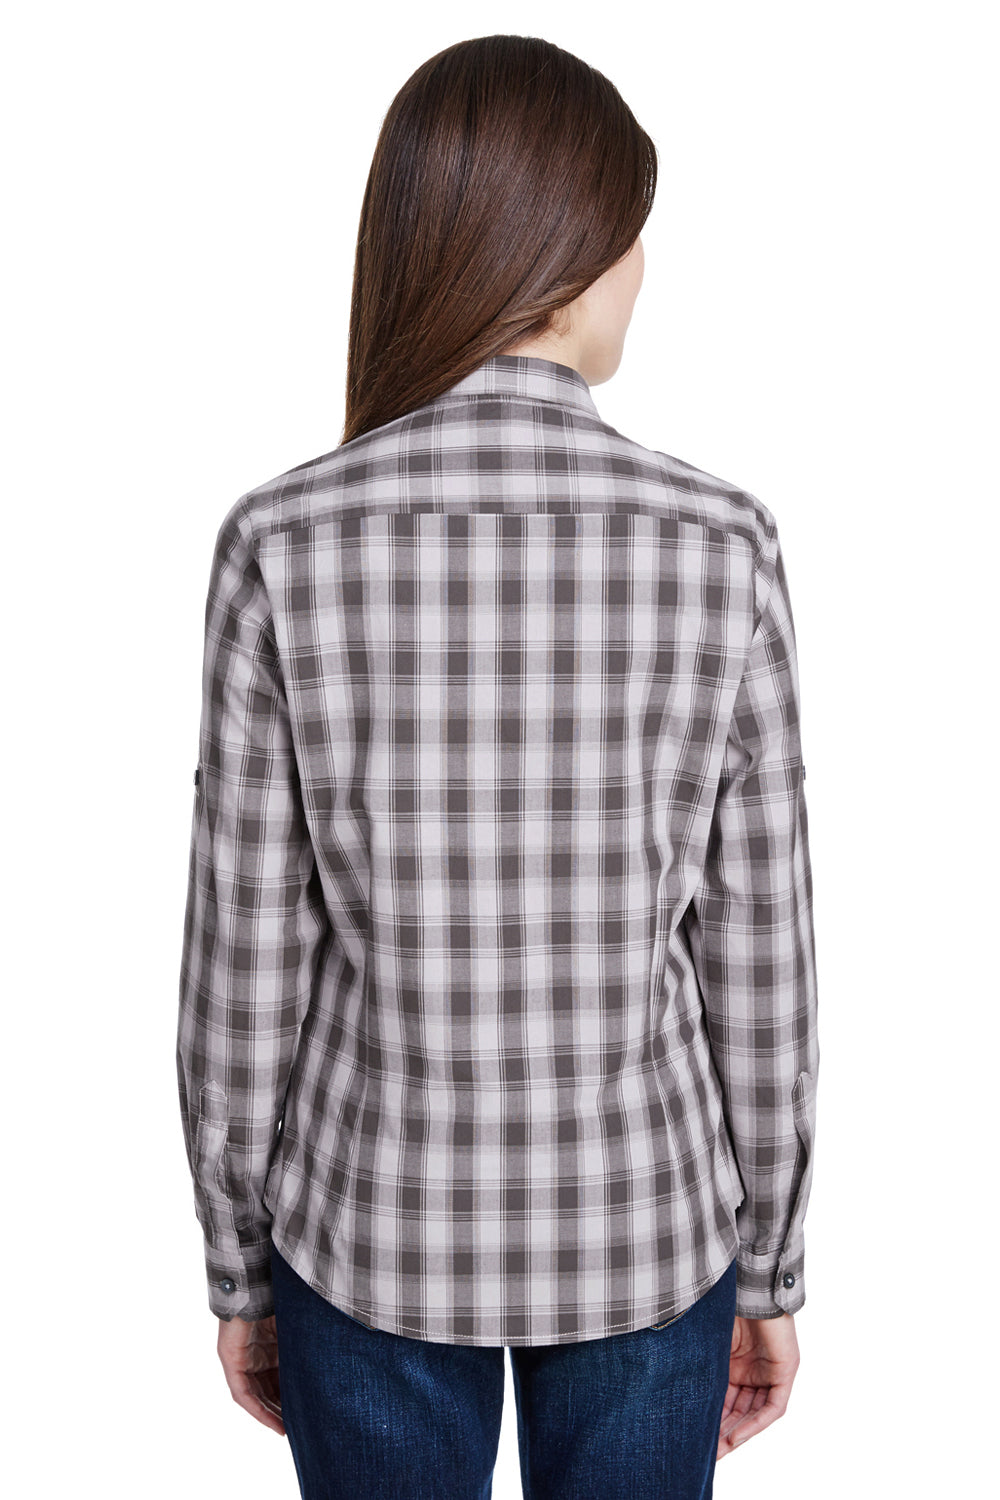 Artisan Collection RP350 Womens Mulligan Check Long Sleeve Button Down Shirt Steel Grey/Black Model Back